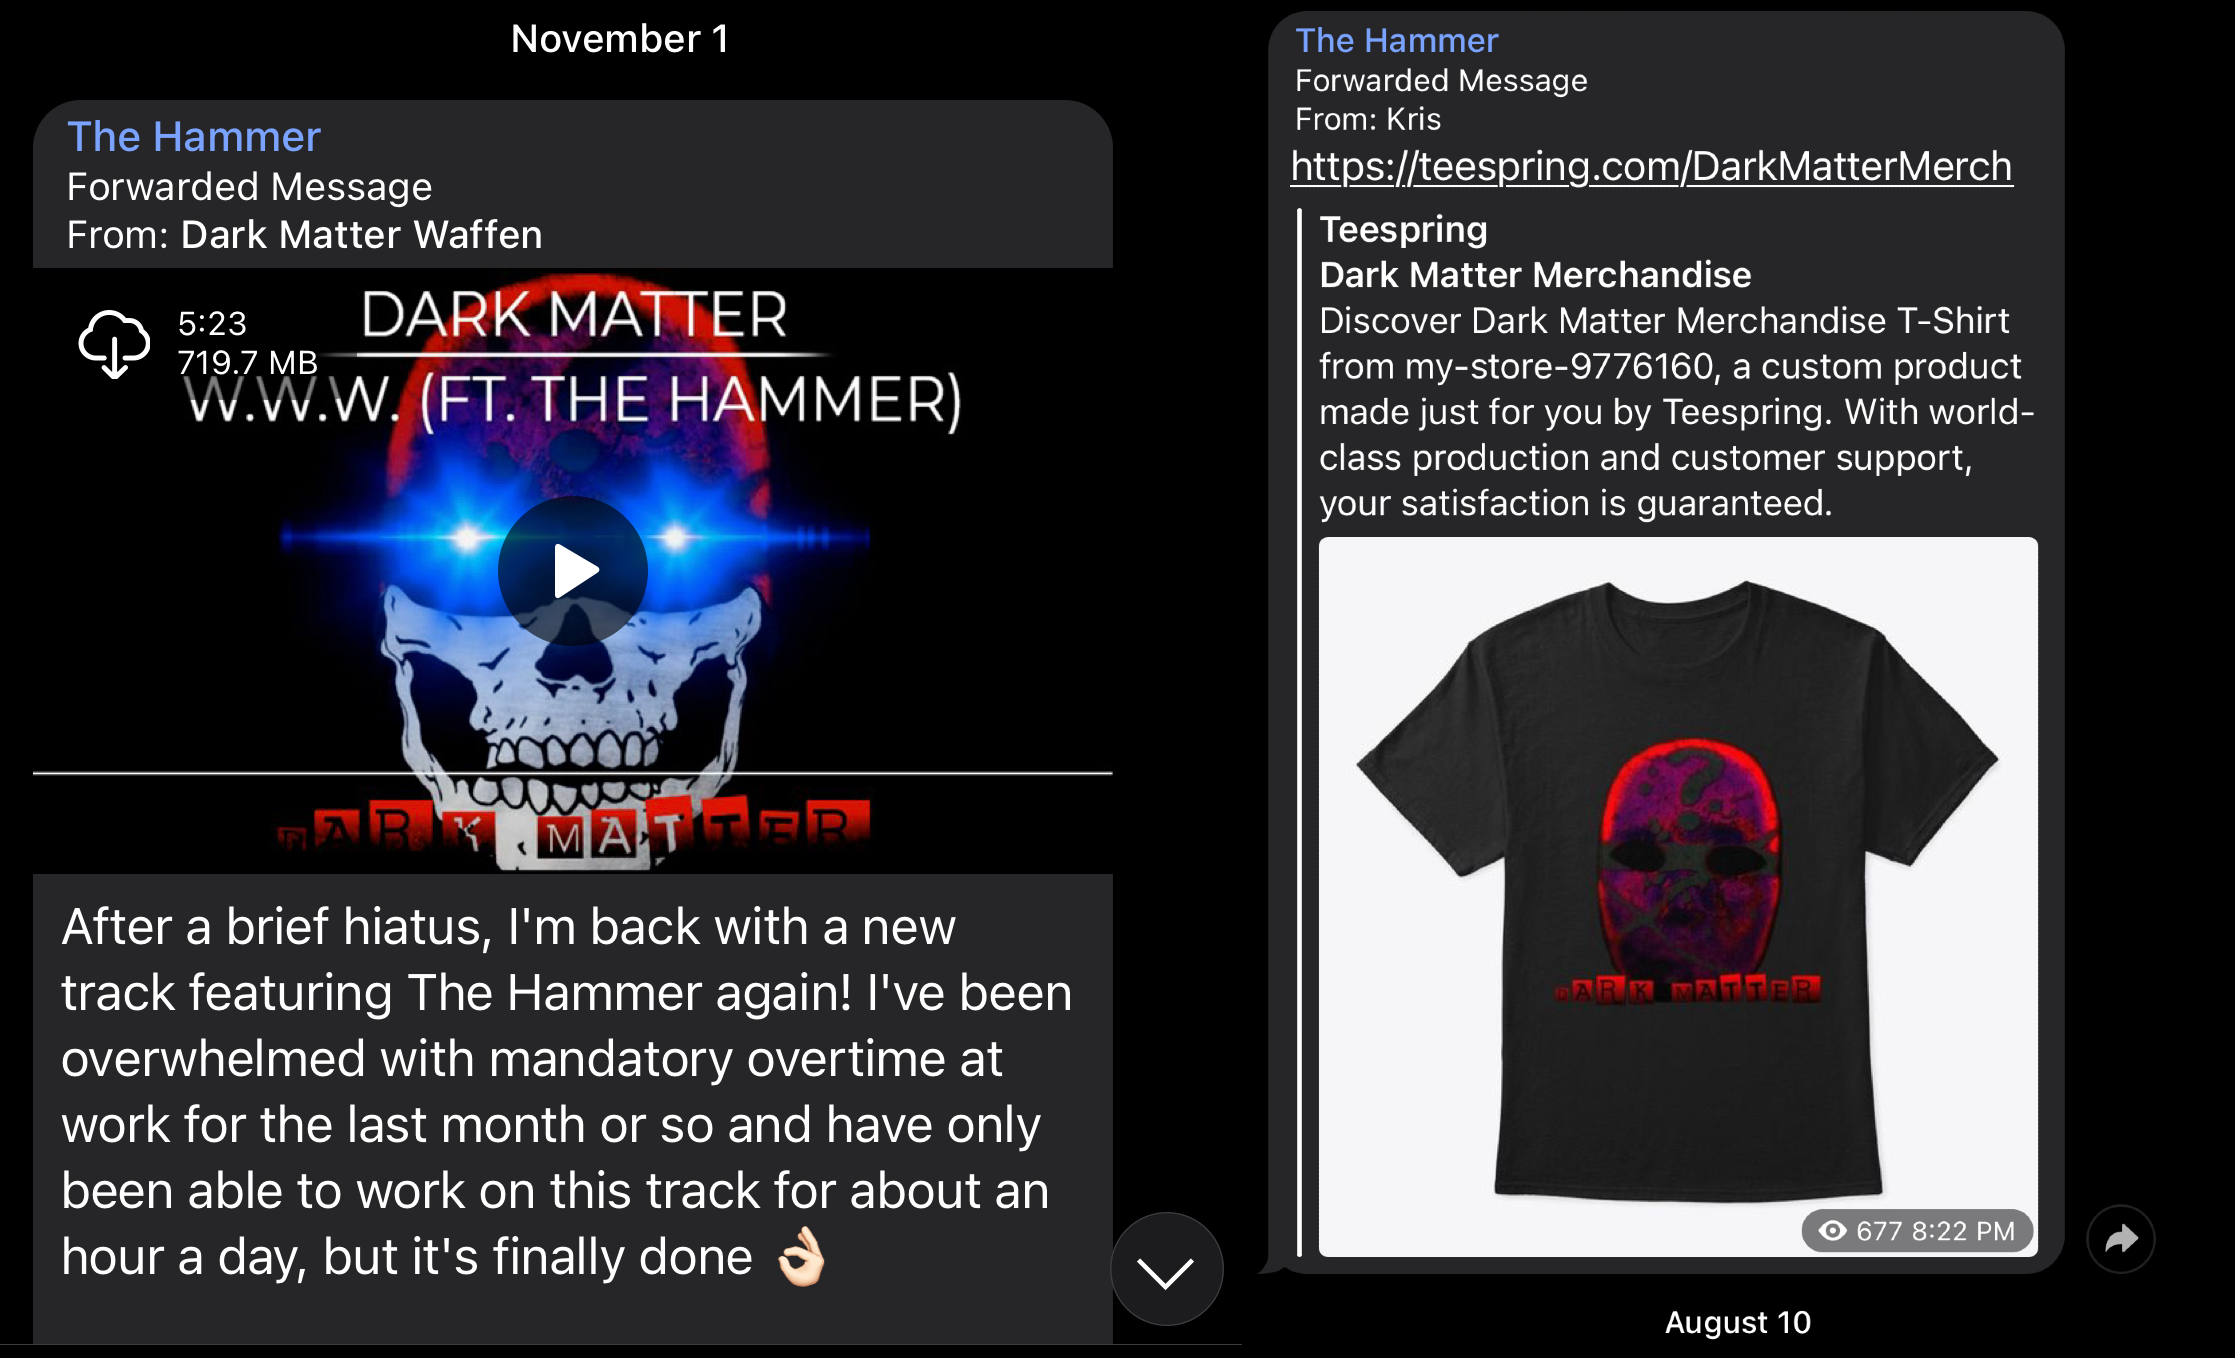 Christopher Pohlhaus promoting the music and merchandise of DJ Dark Matter.